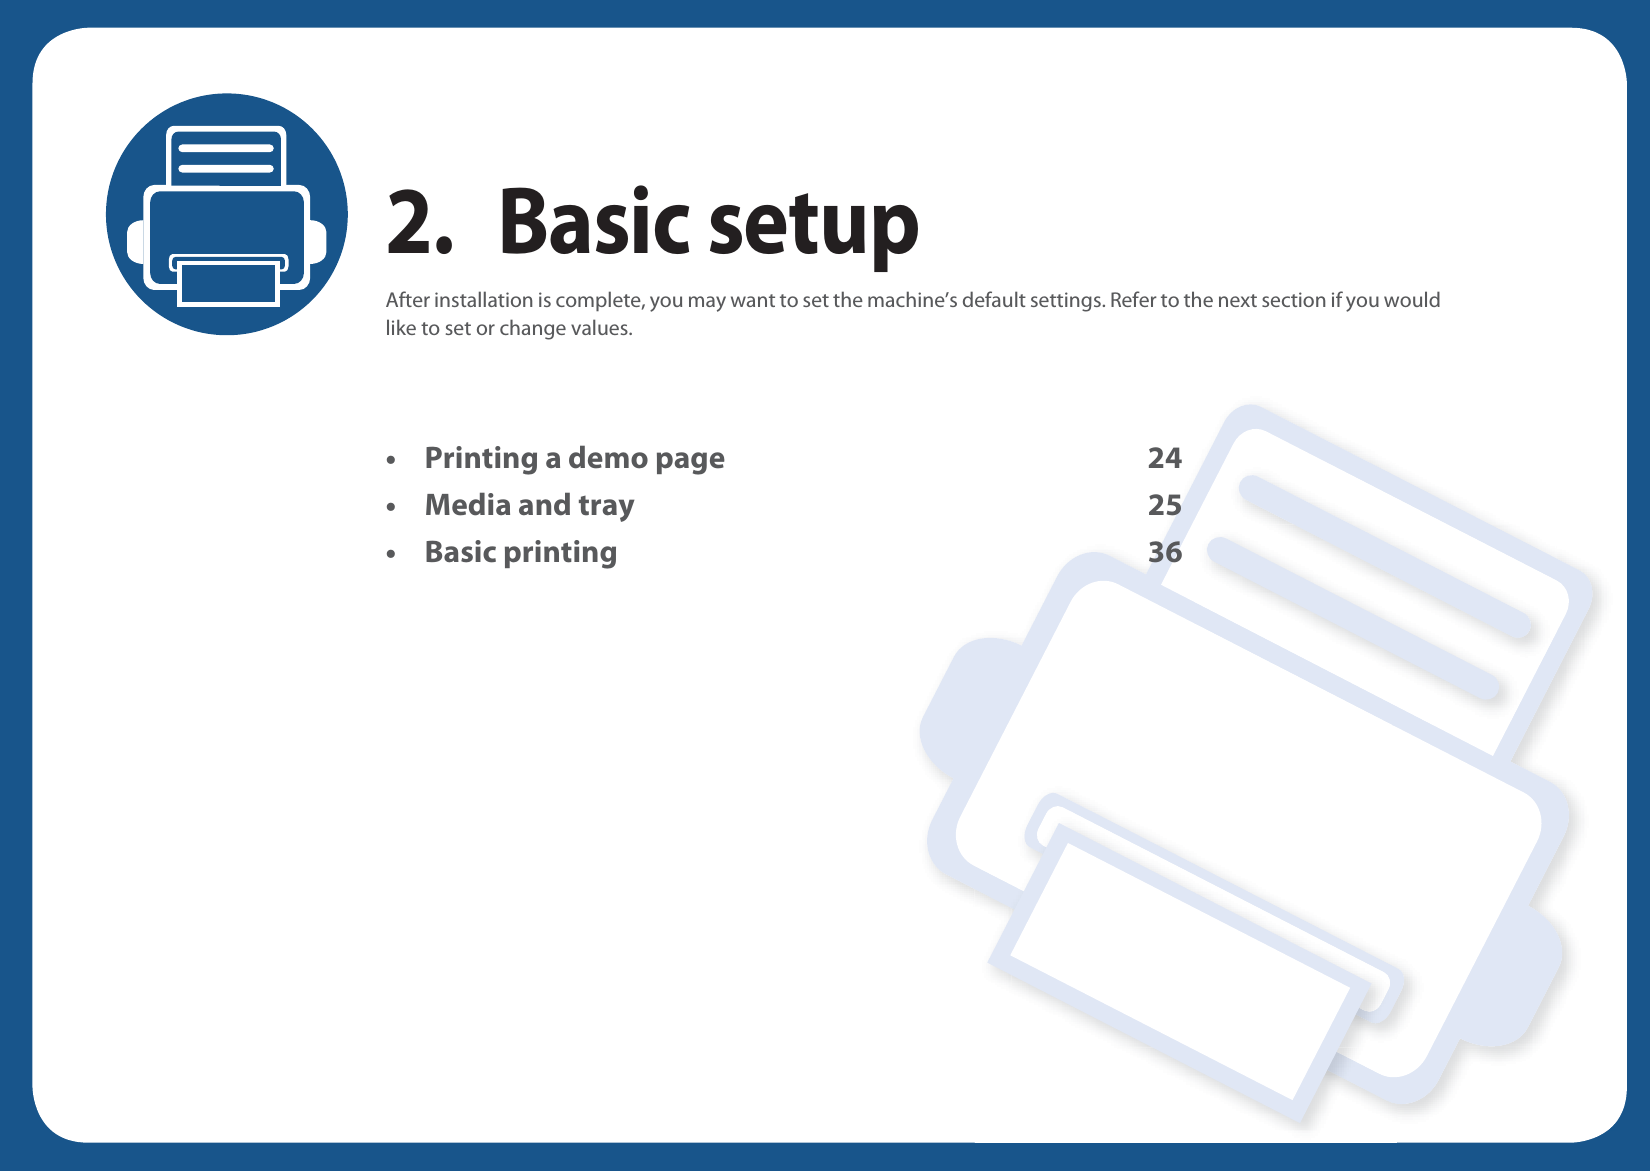 2. Basic setupAfter installation is complete, you may want to set the machine’s default settings. Refer to the next section if you would like to set or change values. • Printing a demo page 24• Media and tray 25• Basic printing 36